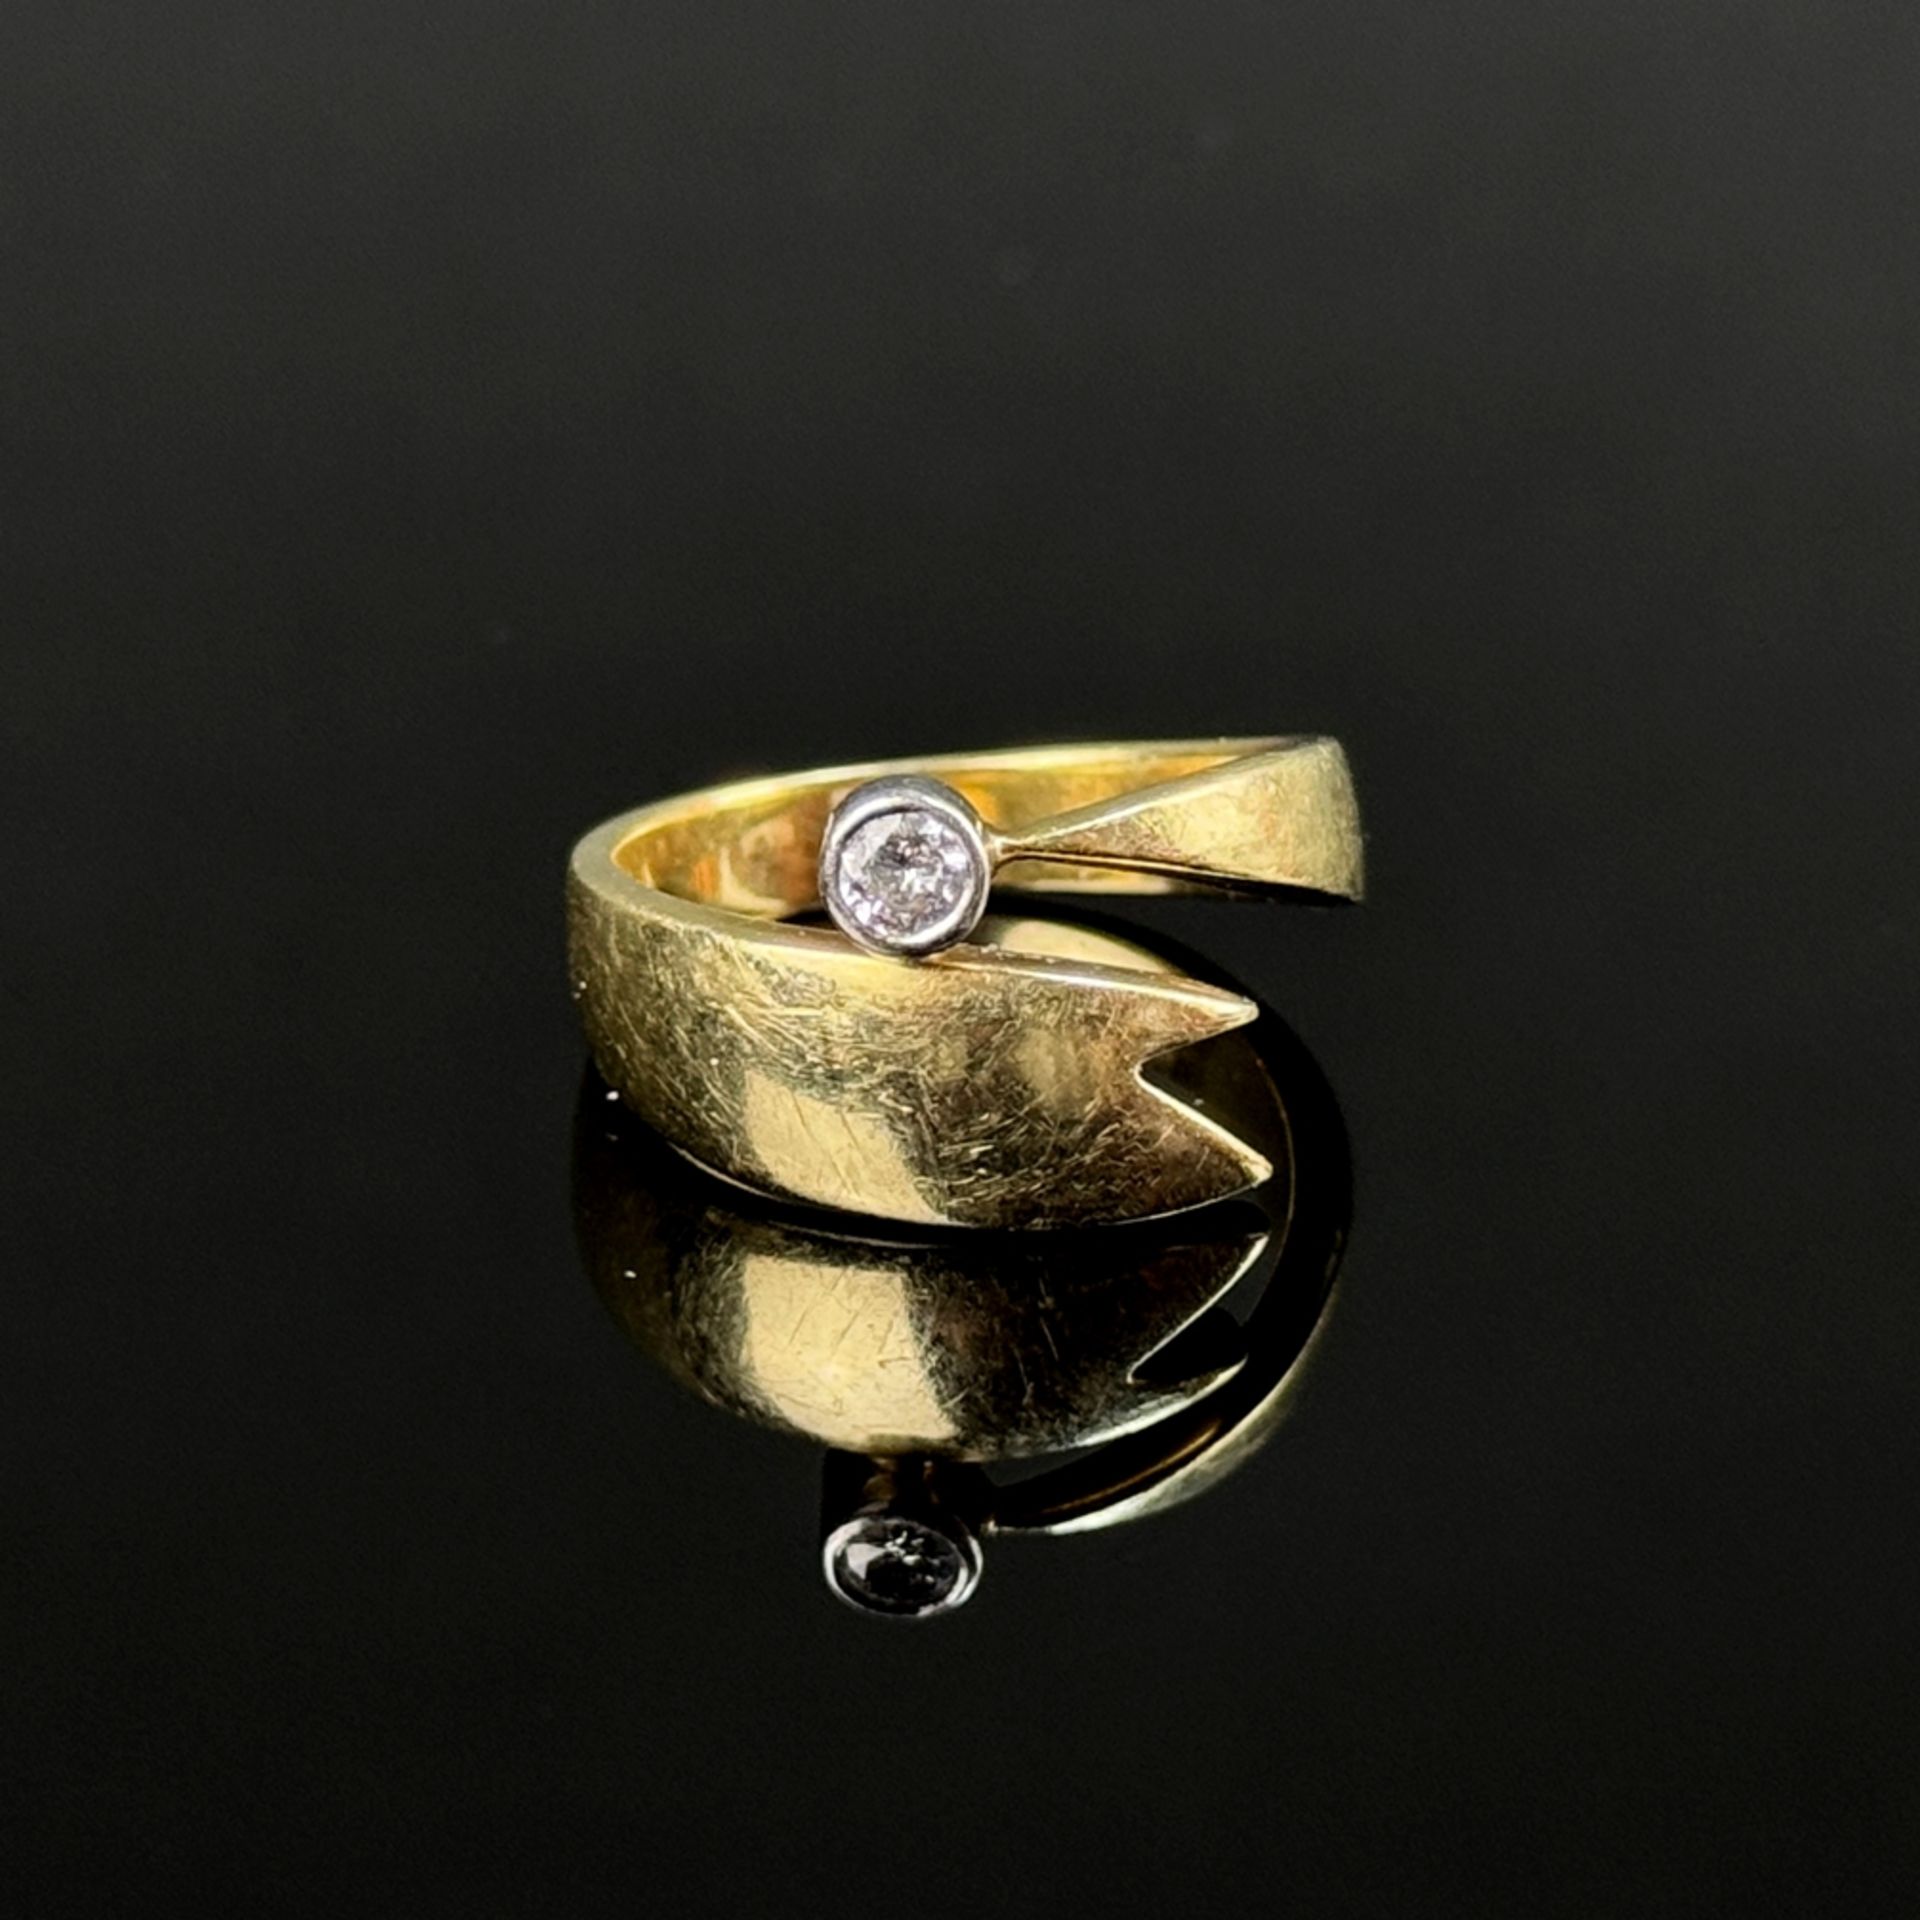 Modern diamond ring, 585/14K yellow gold (hallmarked), 5.89g, show side with a tail-shaped element - Image 2 of 3